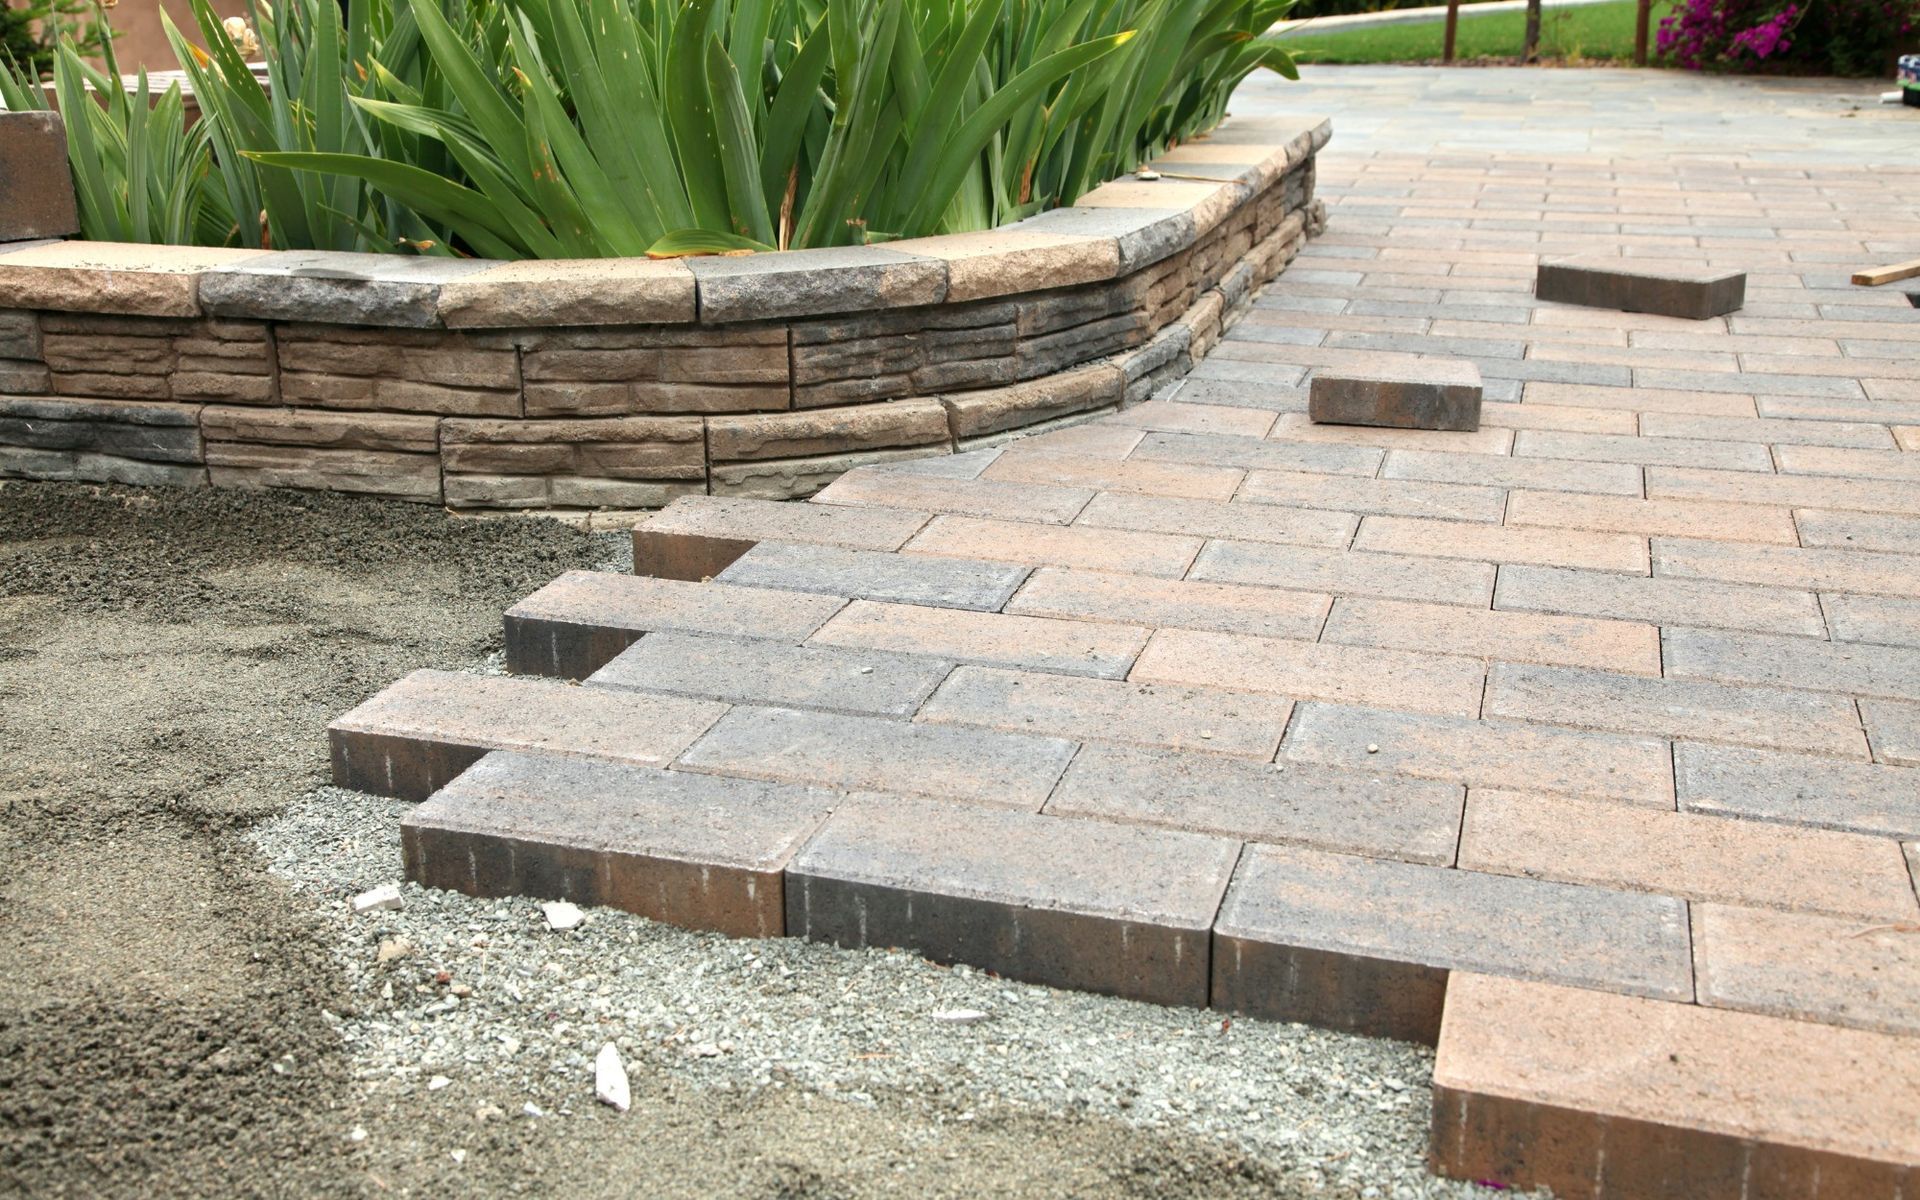 landscape paver edging is installed to divide the garden and the paved patio